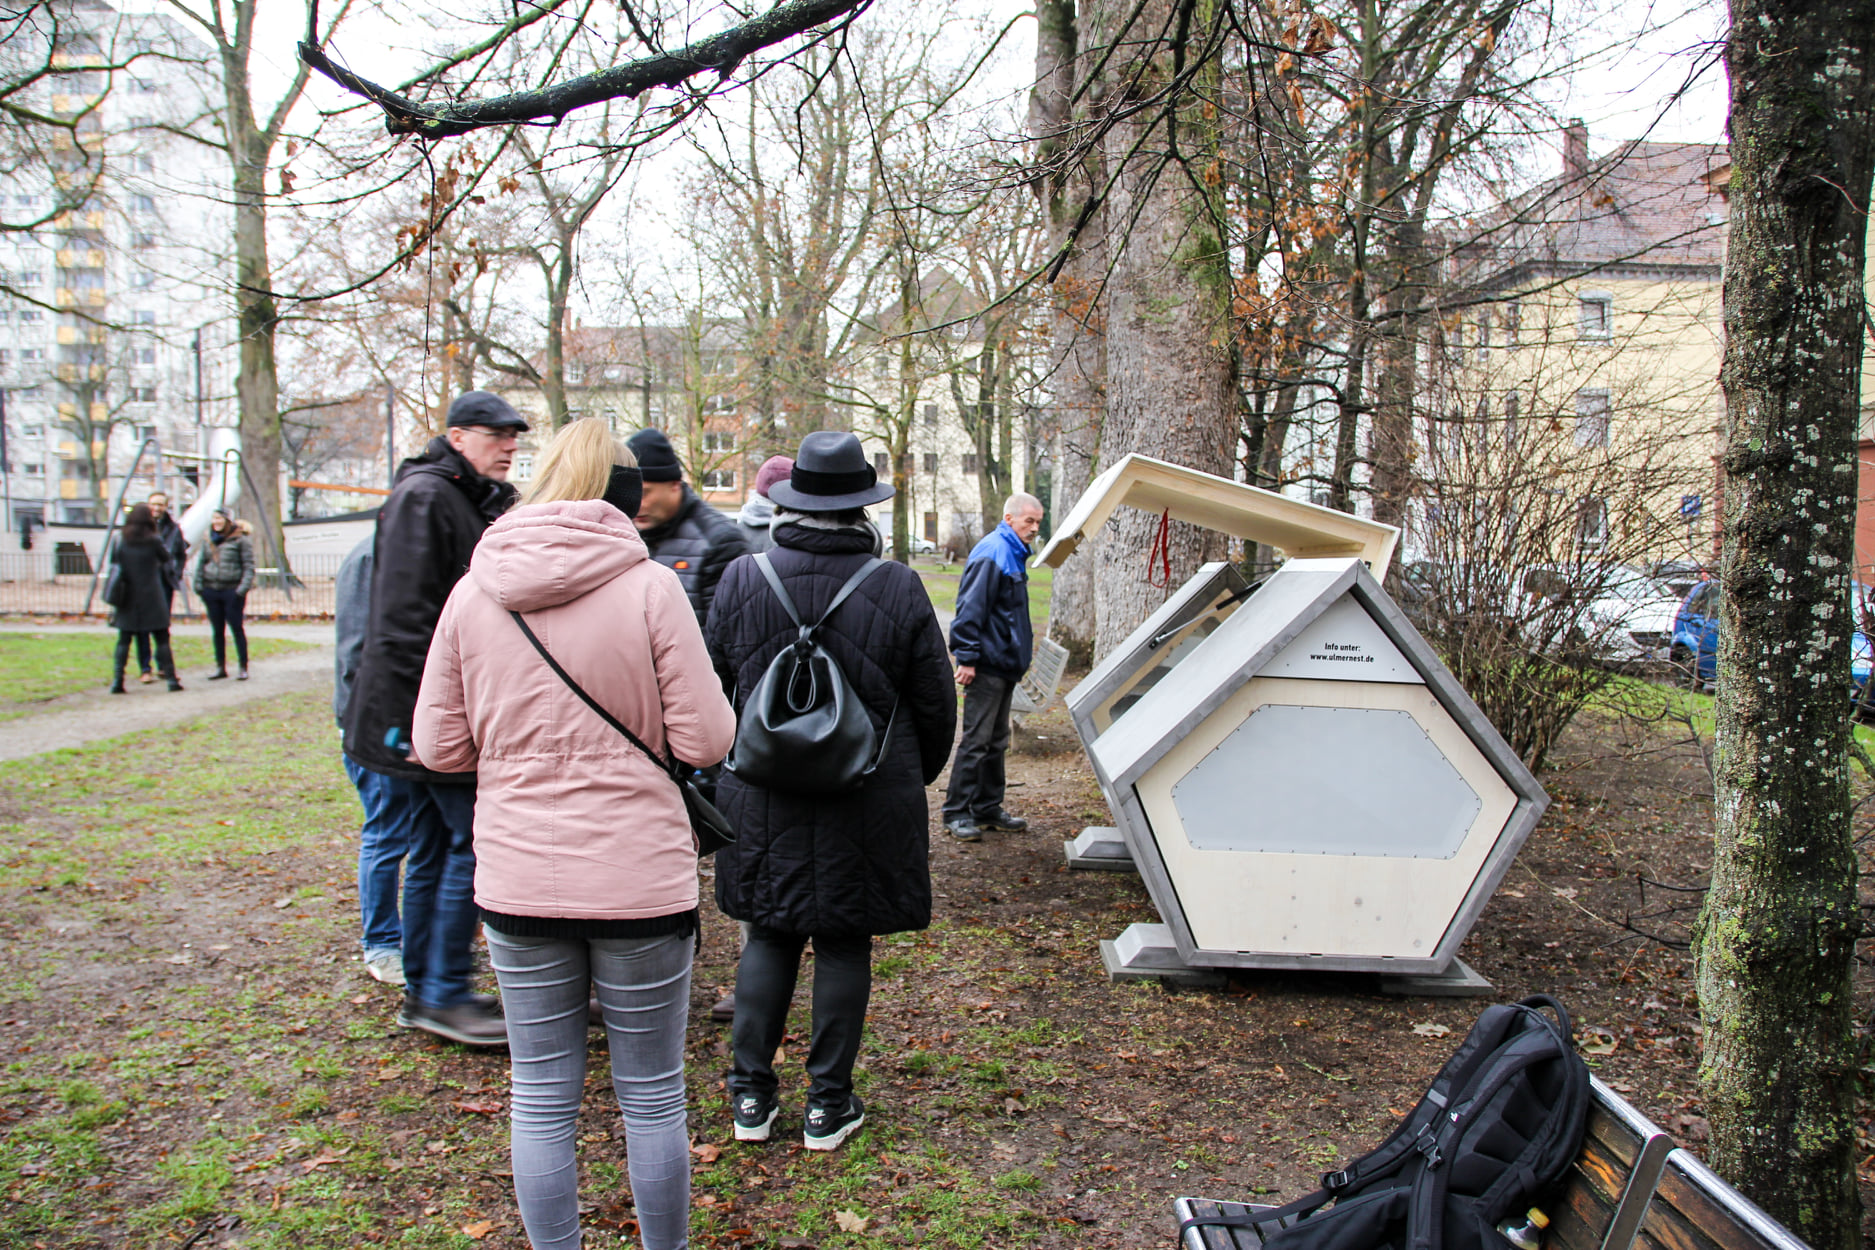 The form prototype was presented in two different places; to passers-by, to affected persons, and to those working in homeless assistance, whose first impressions and opinions were noted.